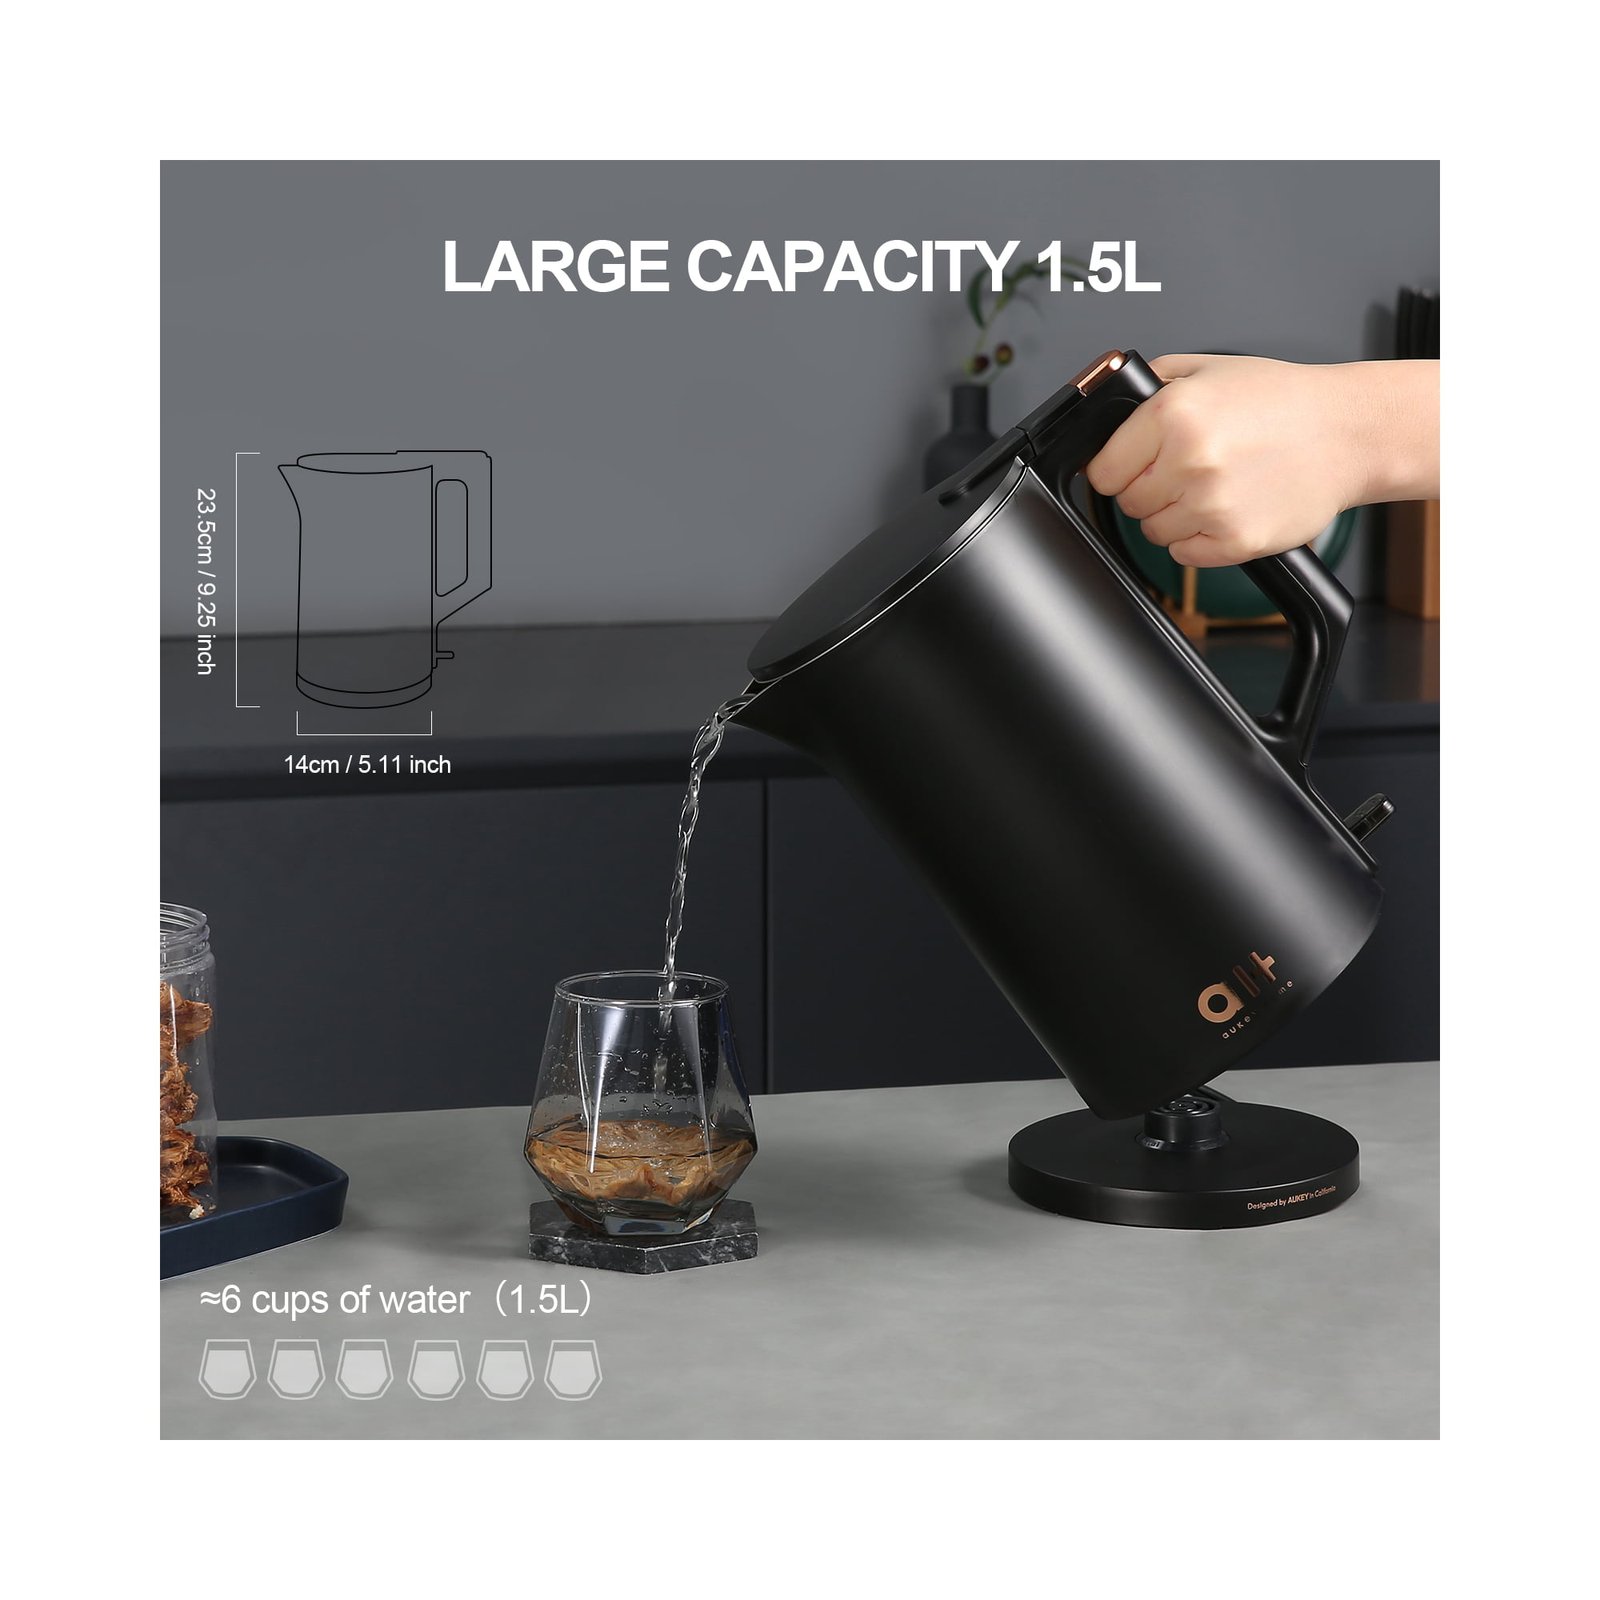 https://themarketdepot.com/wp-content/uploads/2023/01/Aukey-Home-Electric-Kettle-1.5L-Stainless-Steel-Double-Wall-Cool-Touch-Tea-Kettle-with-Overheating-Protection-and-Auto-Shut-Off-Black-4.jpeg